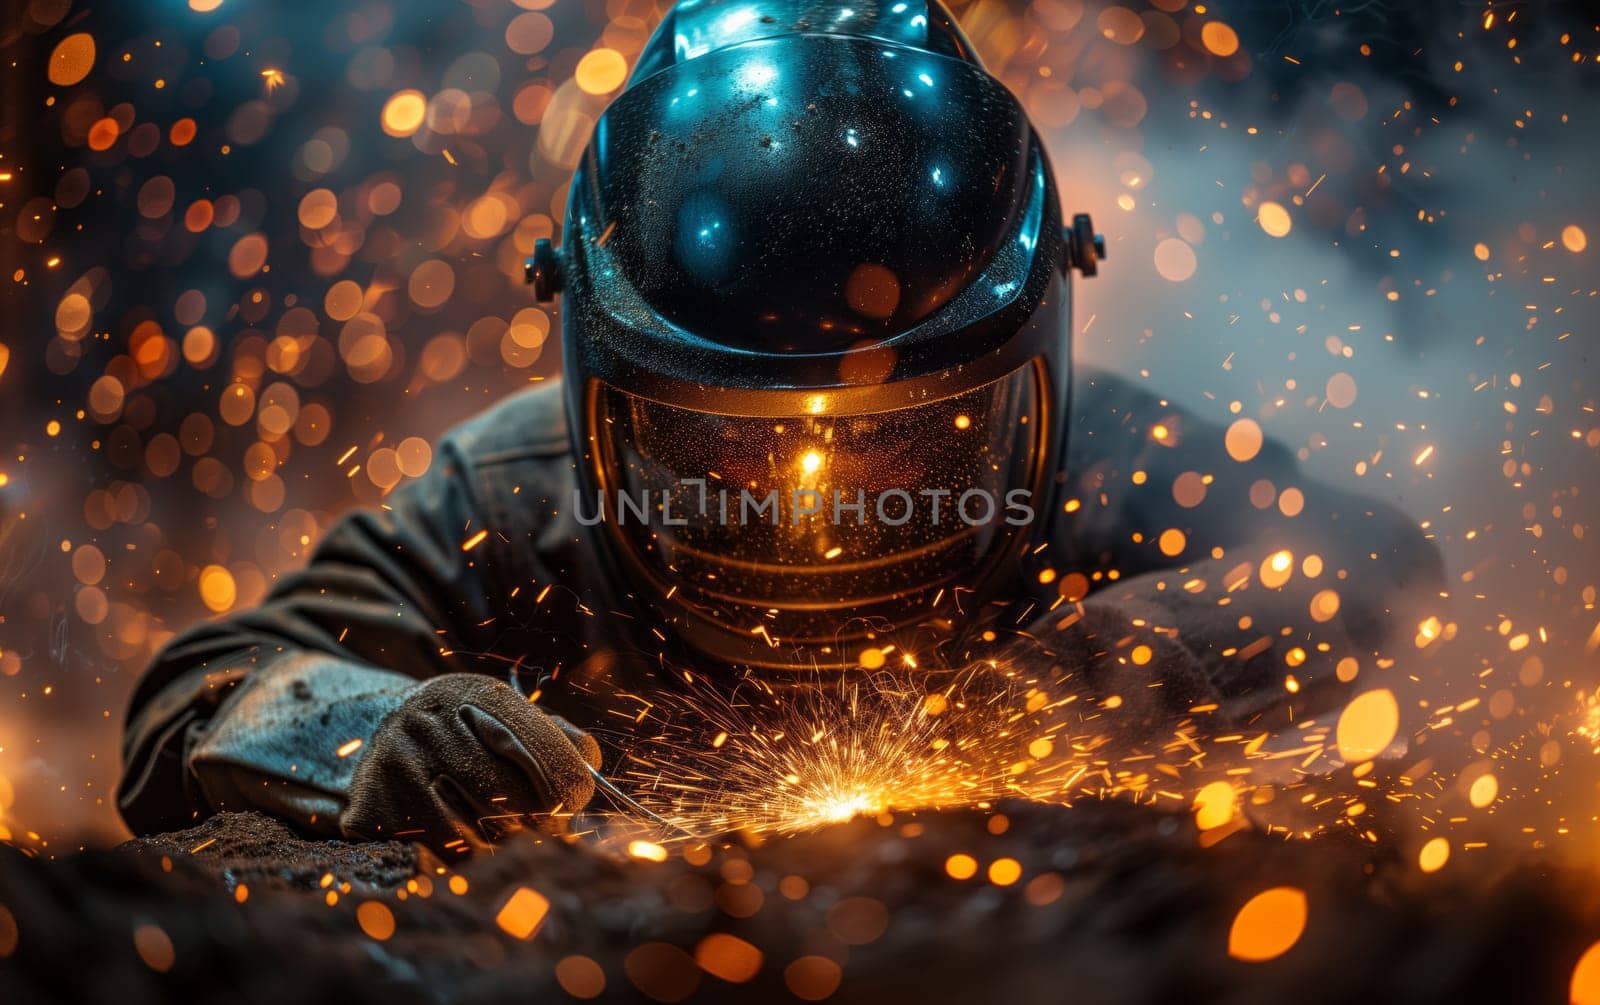 A man in a welding helmet is using personal protective equipment to weld a piece of metal in darkness, resembling a scene from an action film